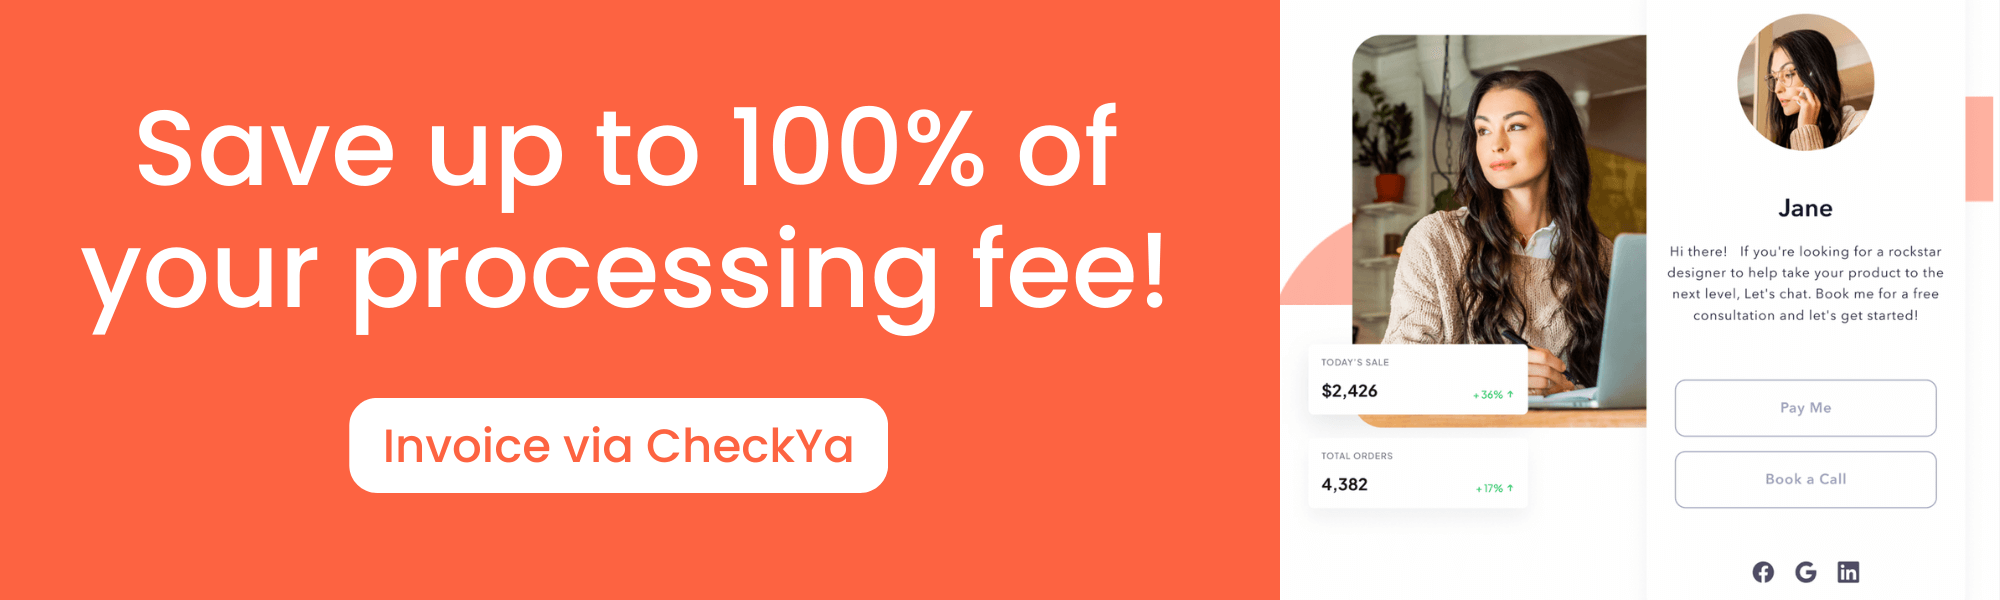 Save up to 100% processing fee with CheckYa Invoicing